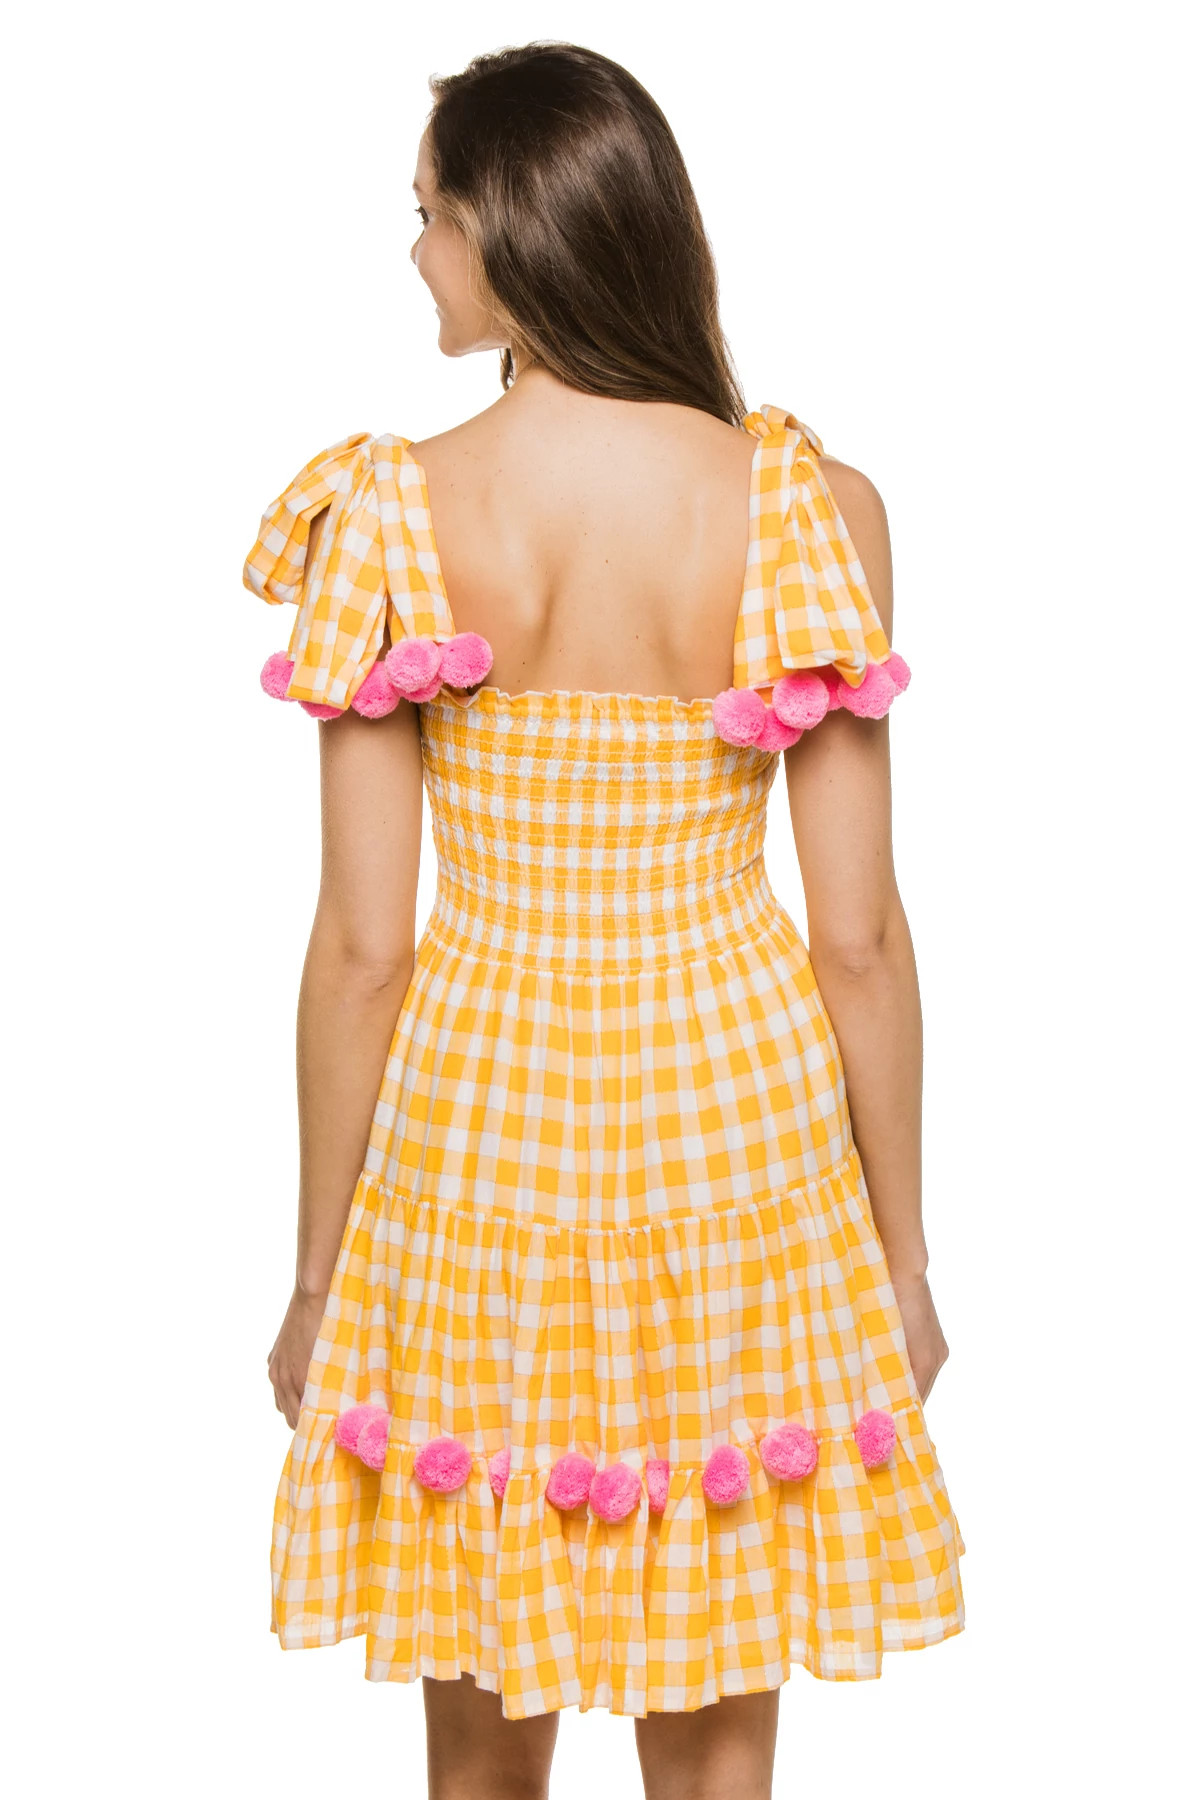 YELLOW GINGHAM & PINK POMPONS Pippa Pompons Mini Dress image number 2